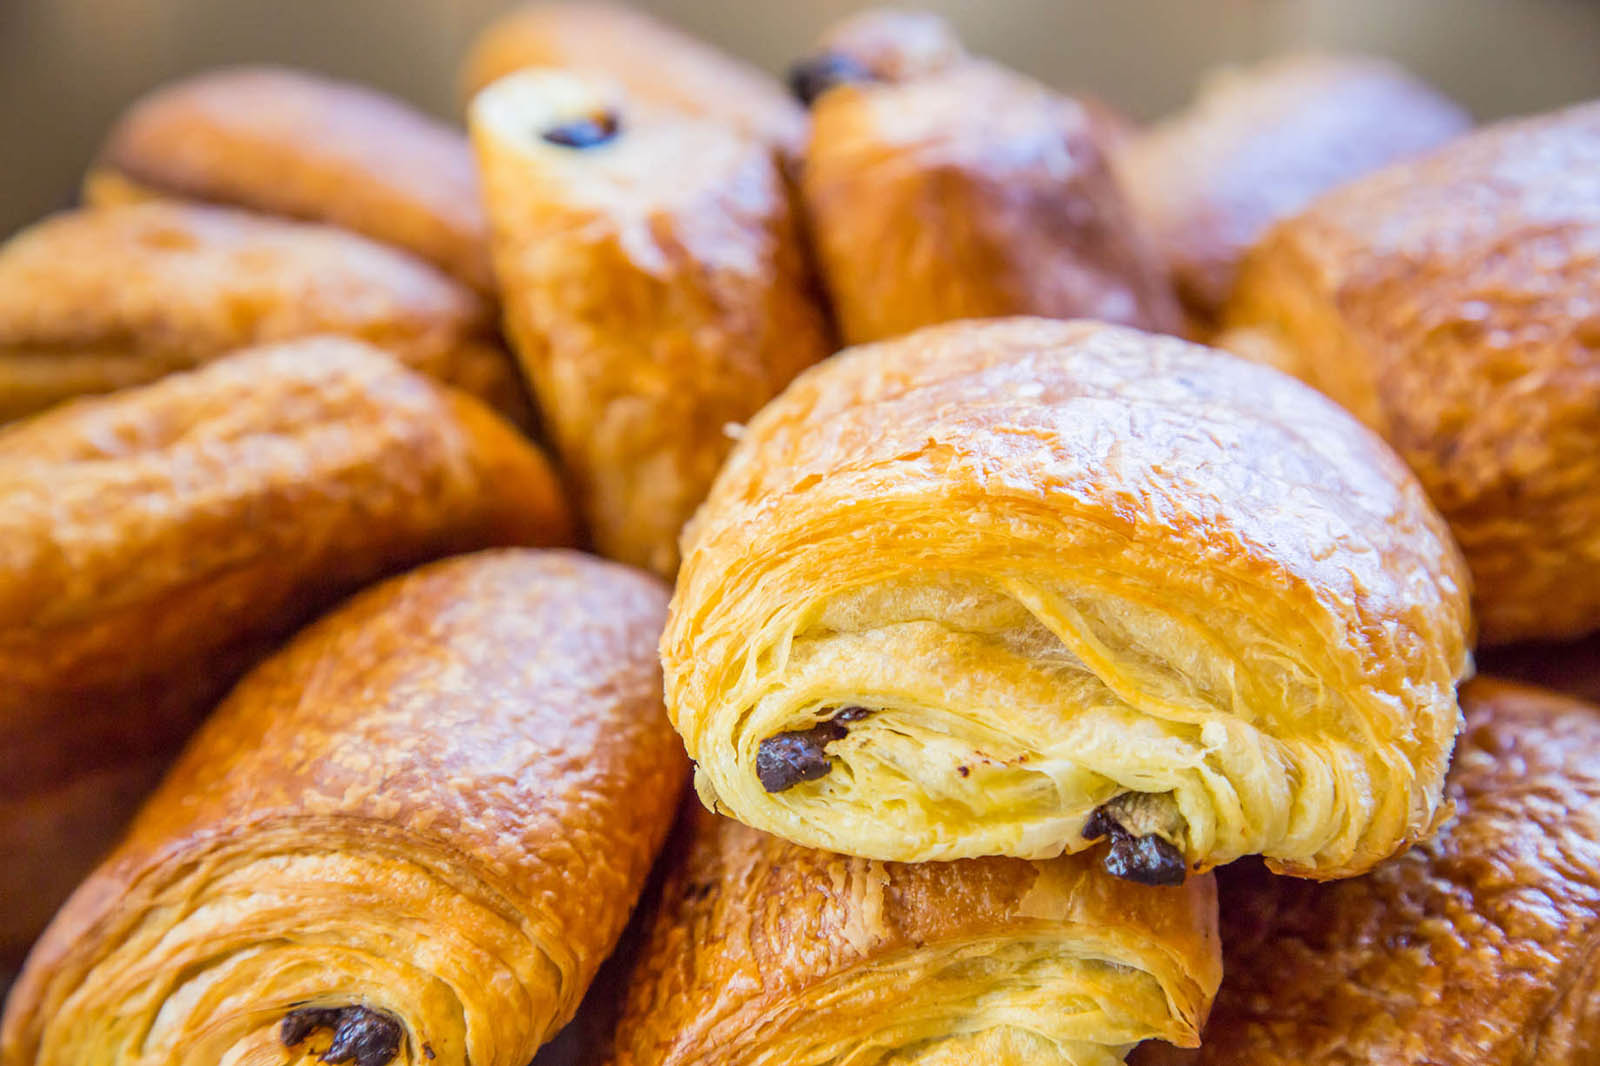 🥐 Can We Guess Your Age and Gender Based on the Pastries You’ve Eaten? Pain Au Chocolat